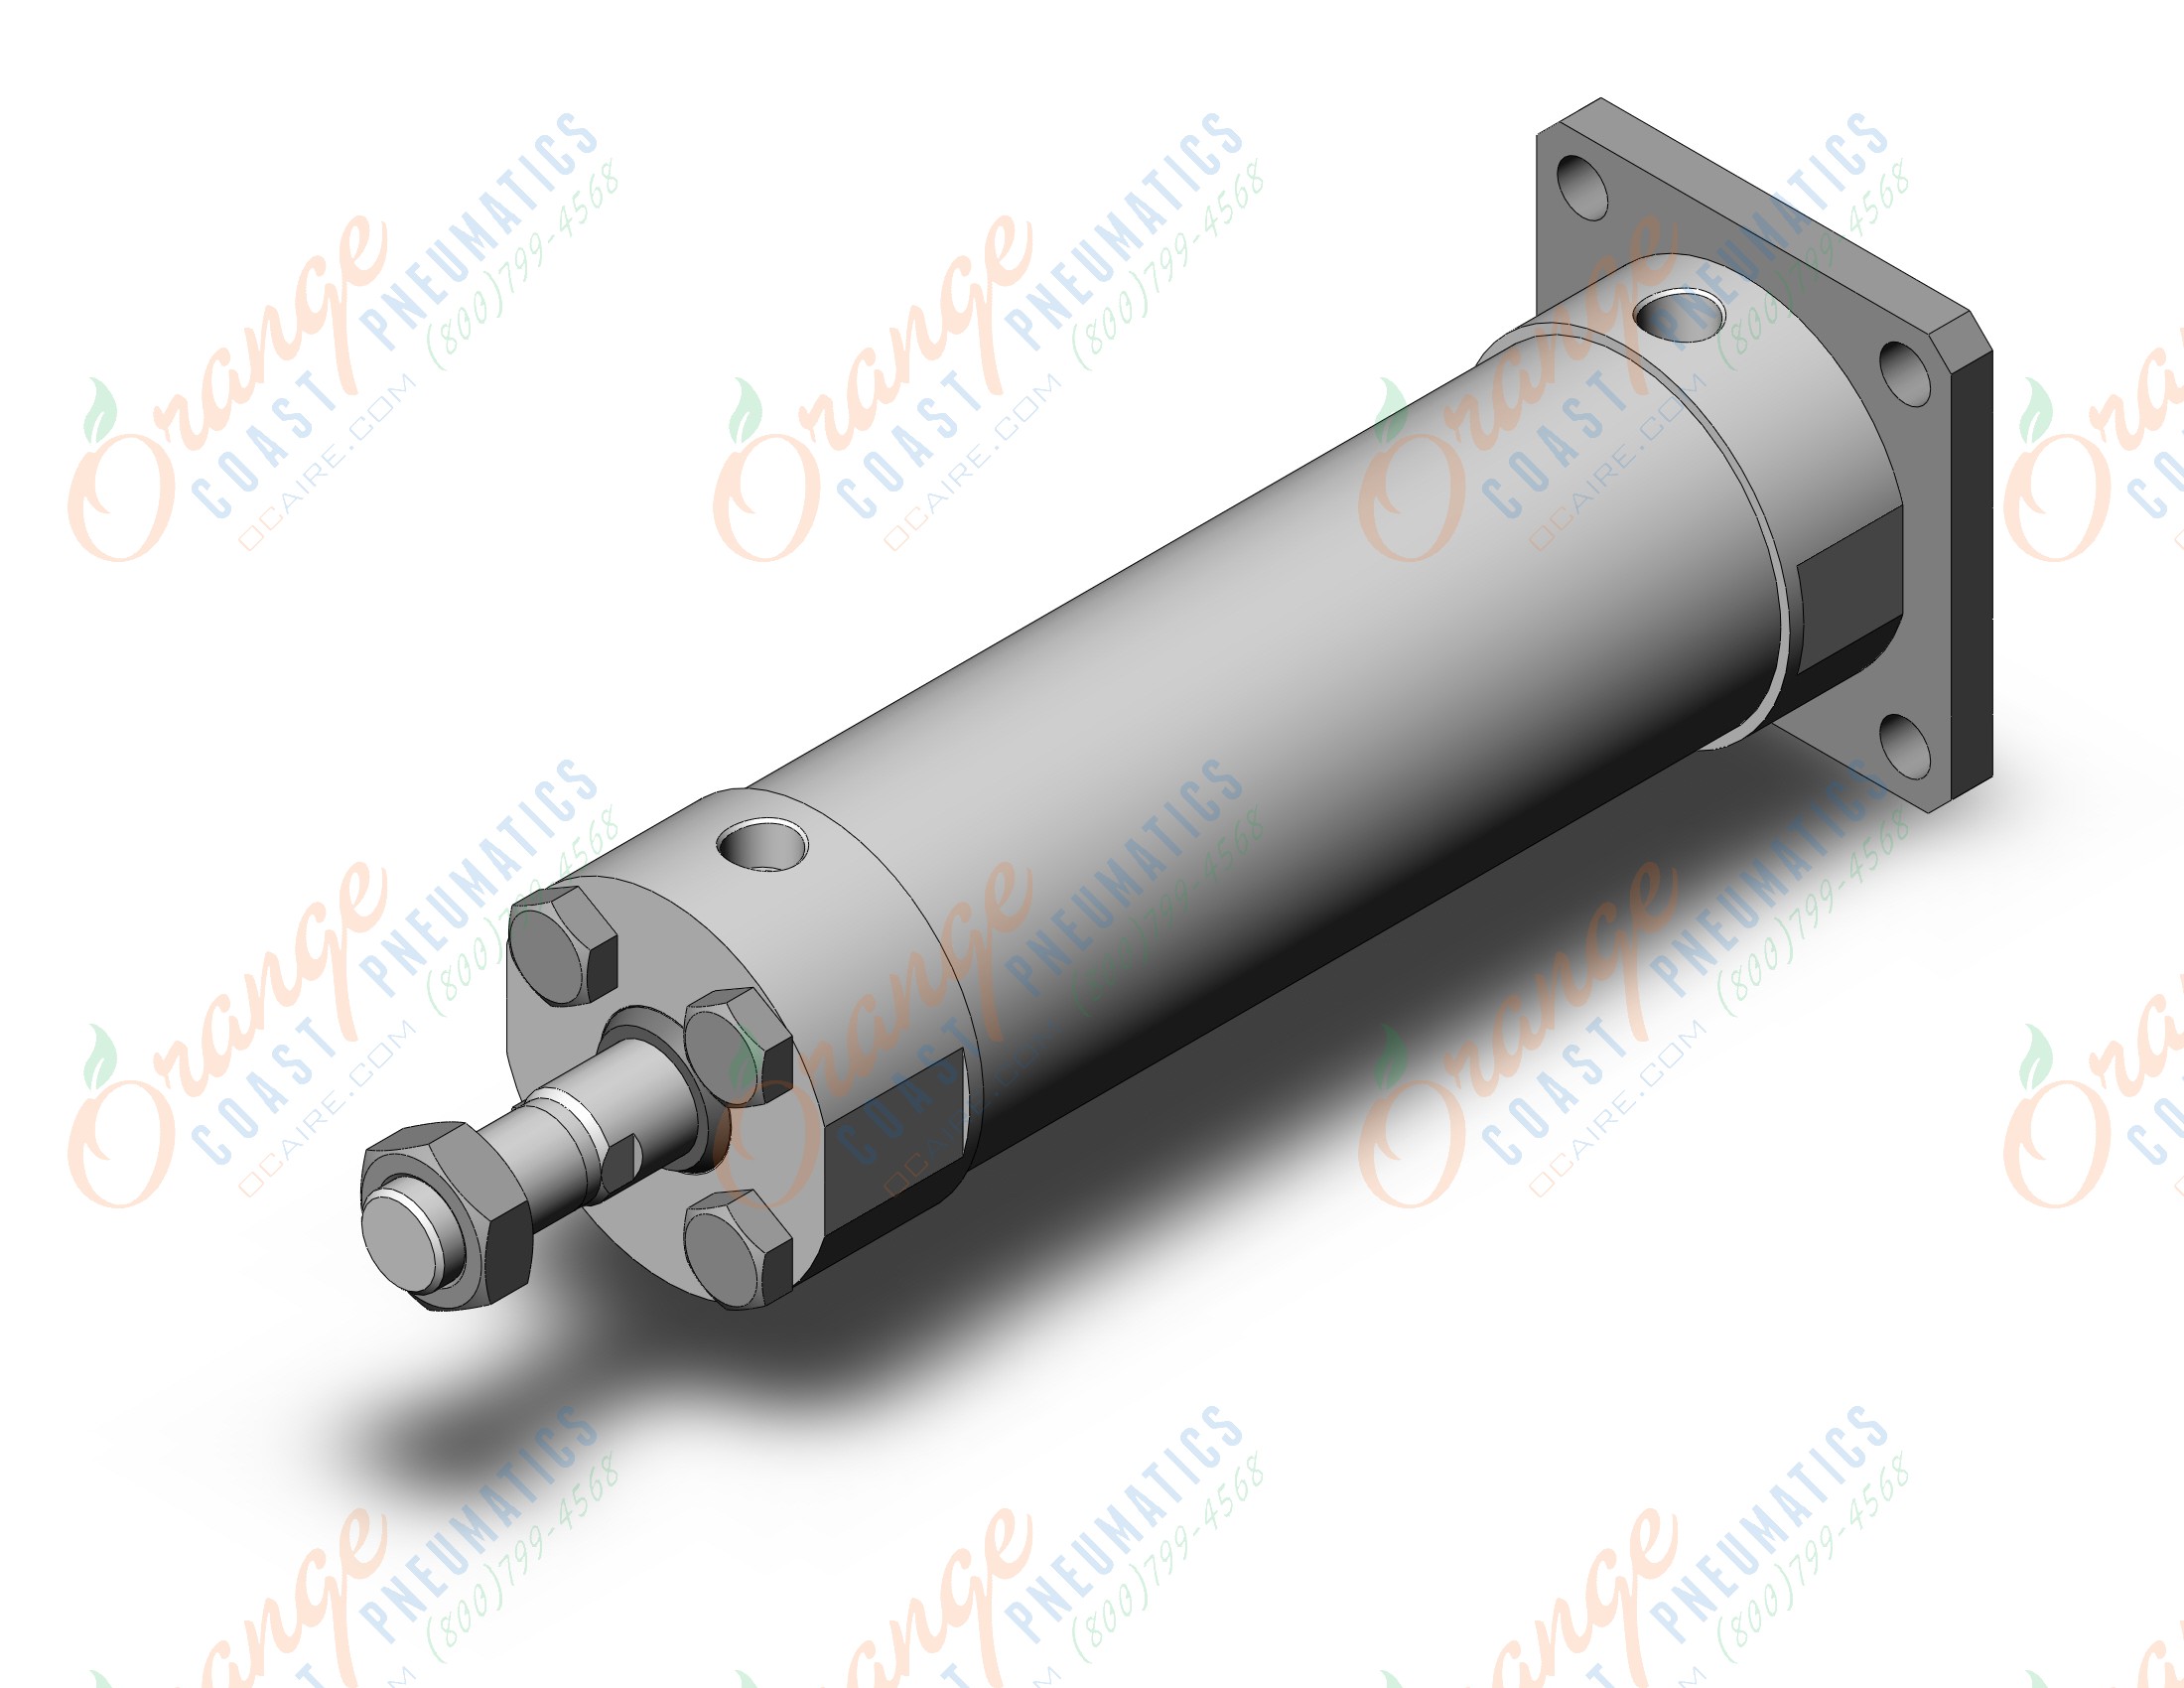 SMC CG5GN63SV-125 cg5, stainless steel cylinder, WATER RESISTANT CYLINDER